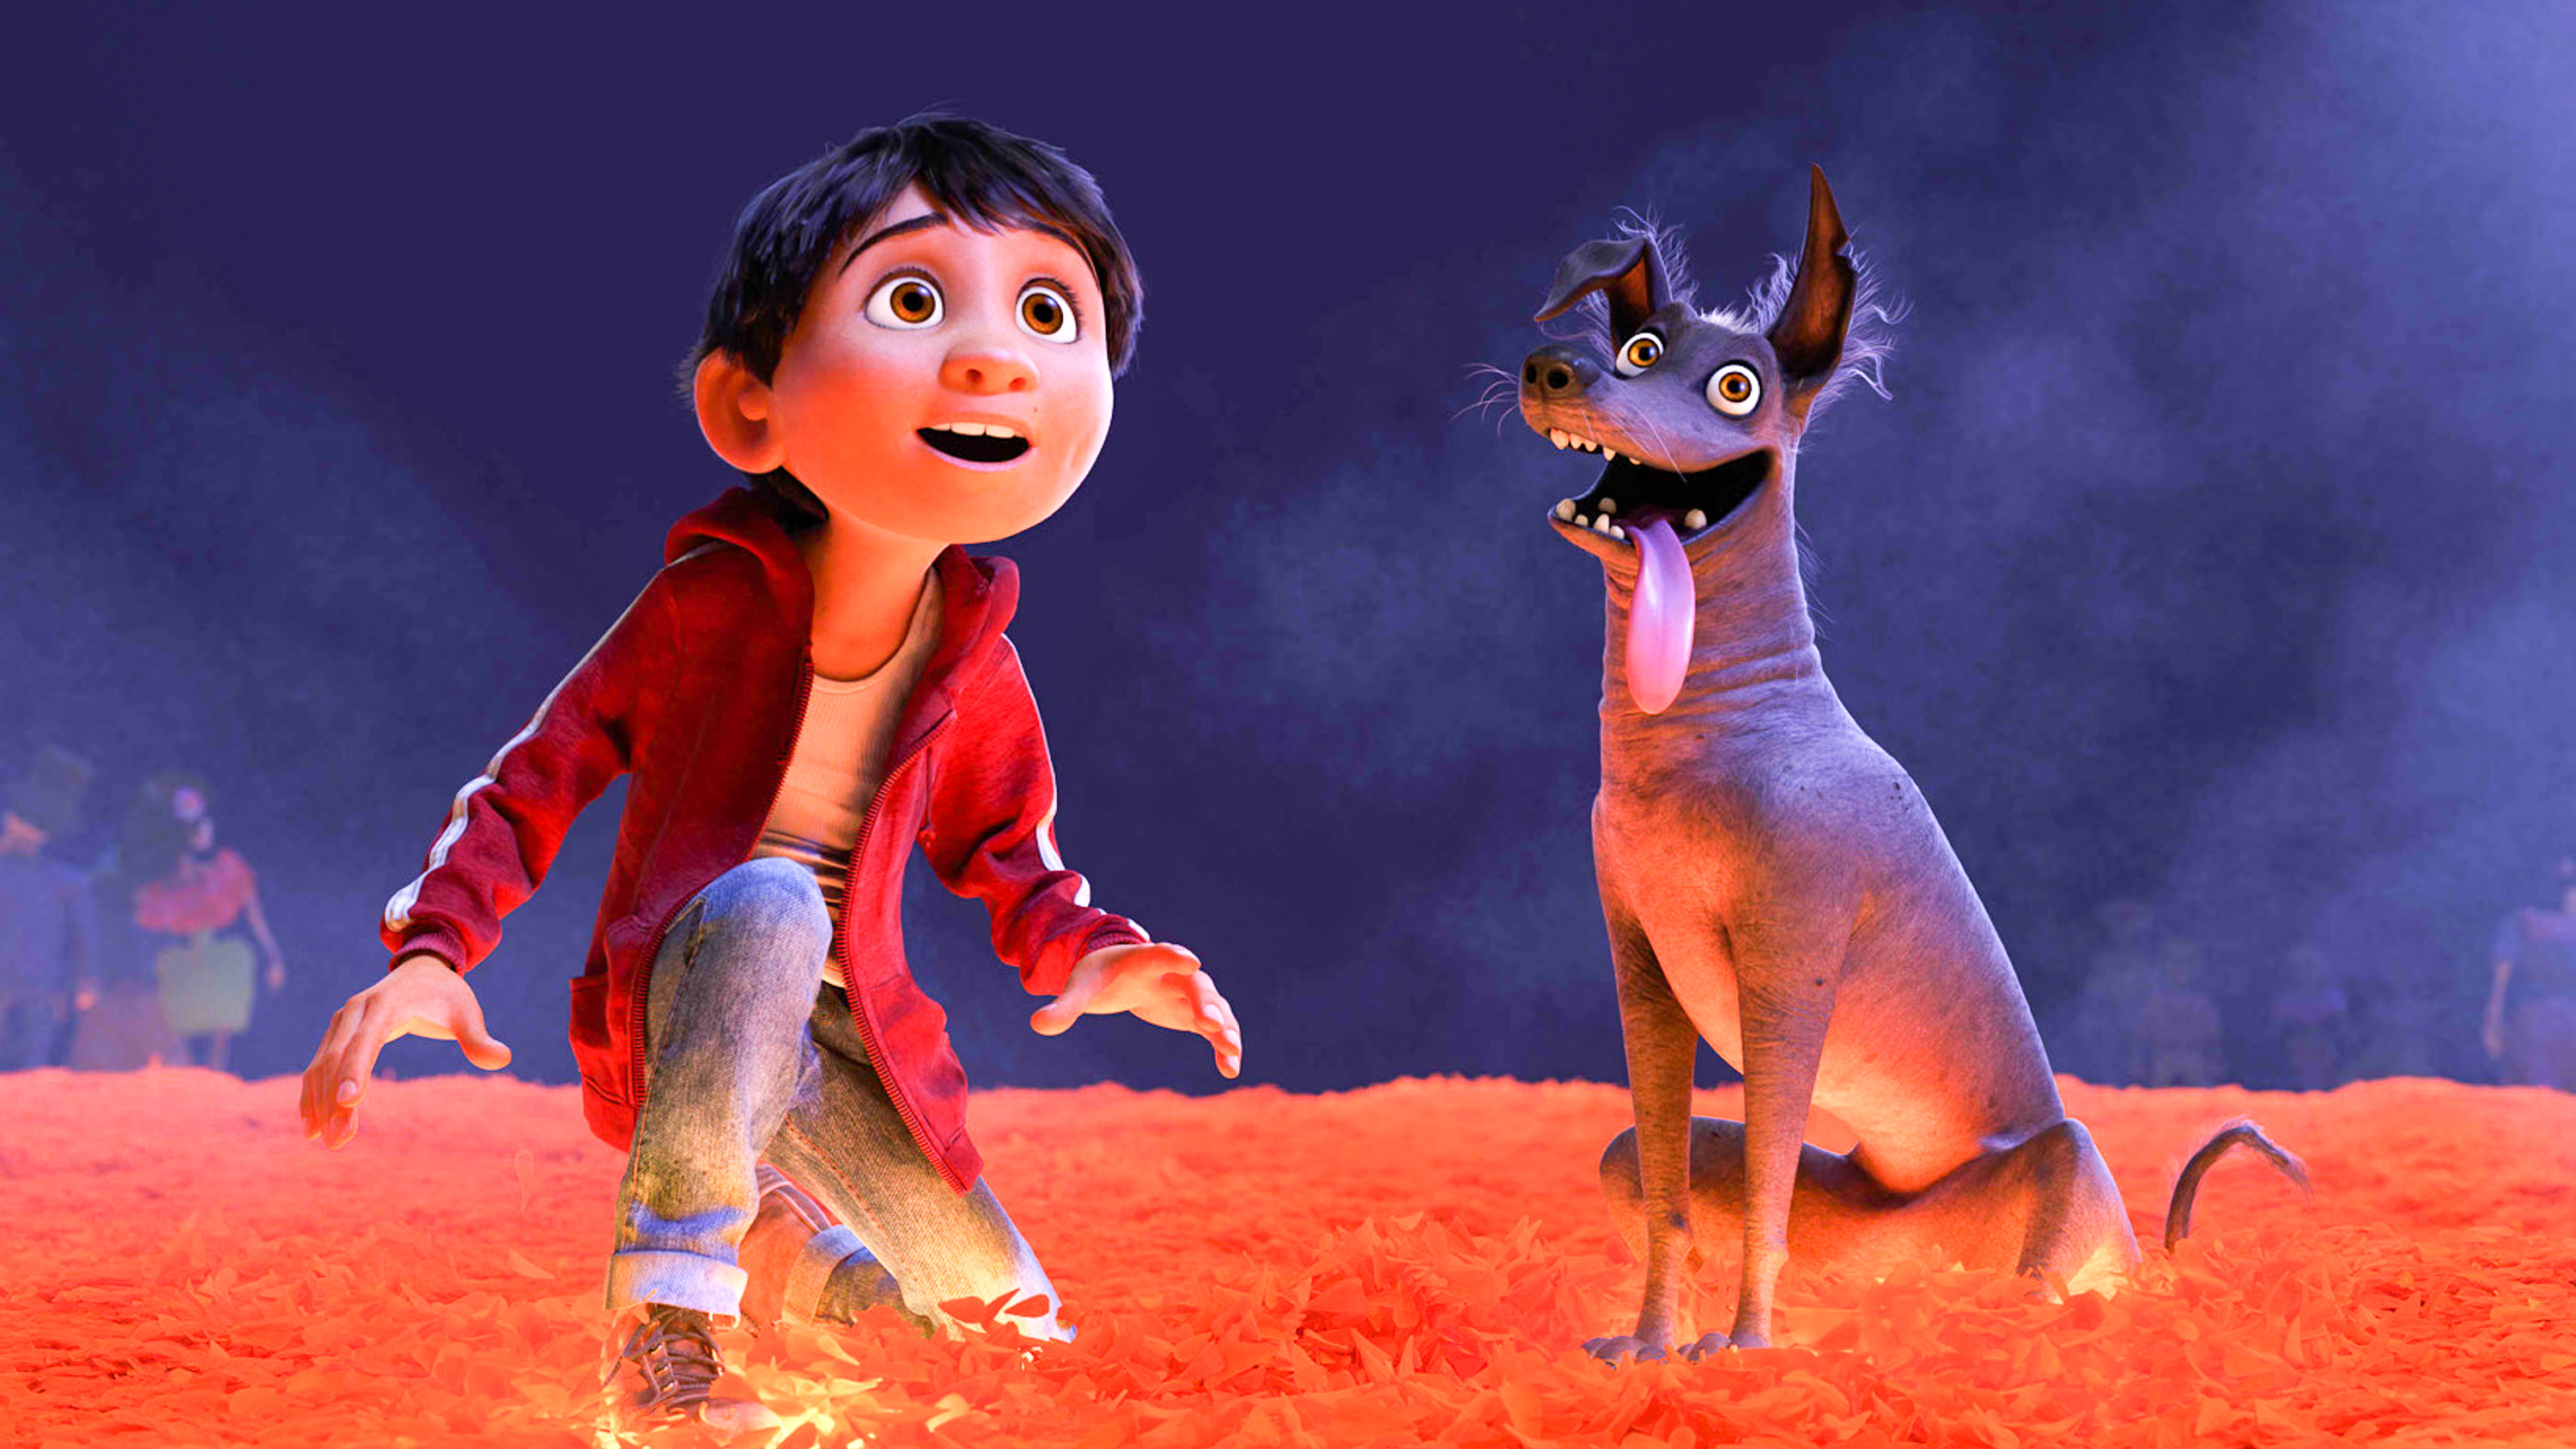 WATCH: Disney releases colorful new trailer for 'Coco'